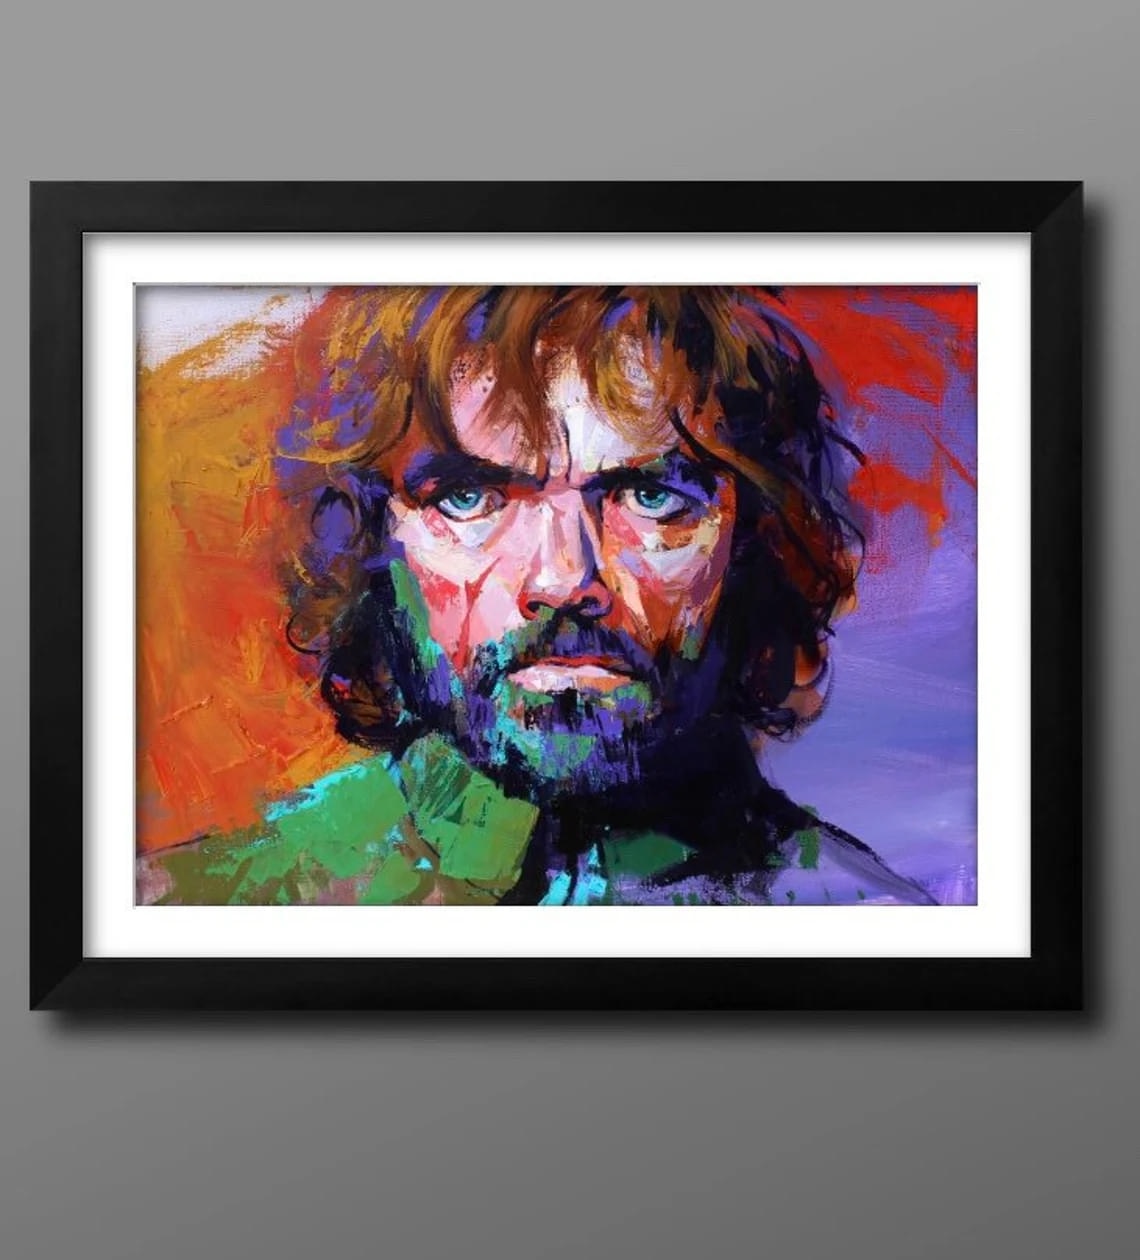 "Tyrion Lannister" - Game of Thrones Portraits Artwork Sample on Wall